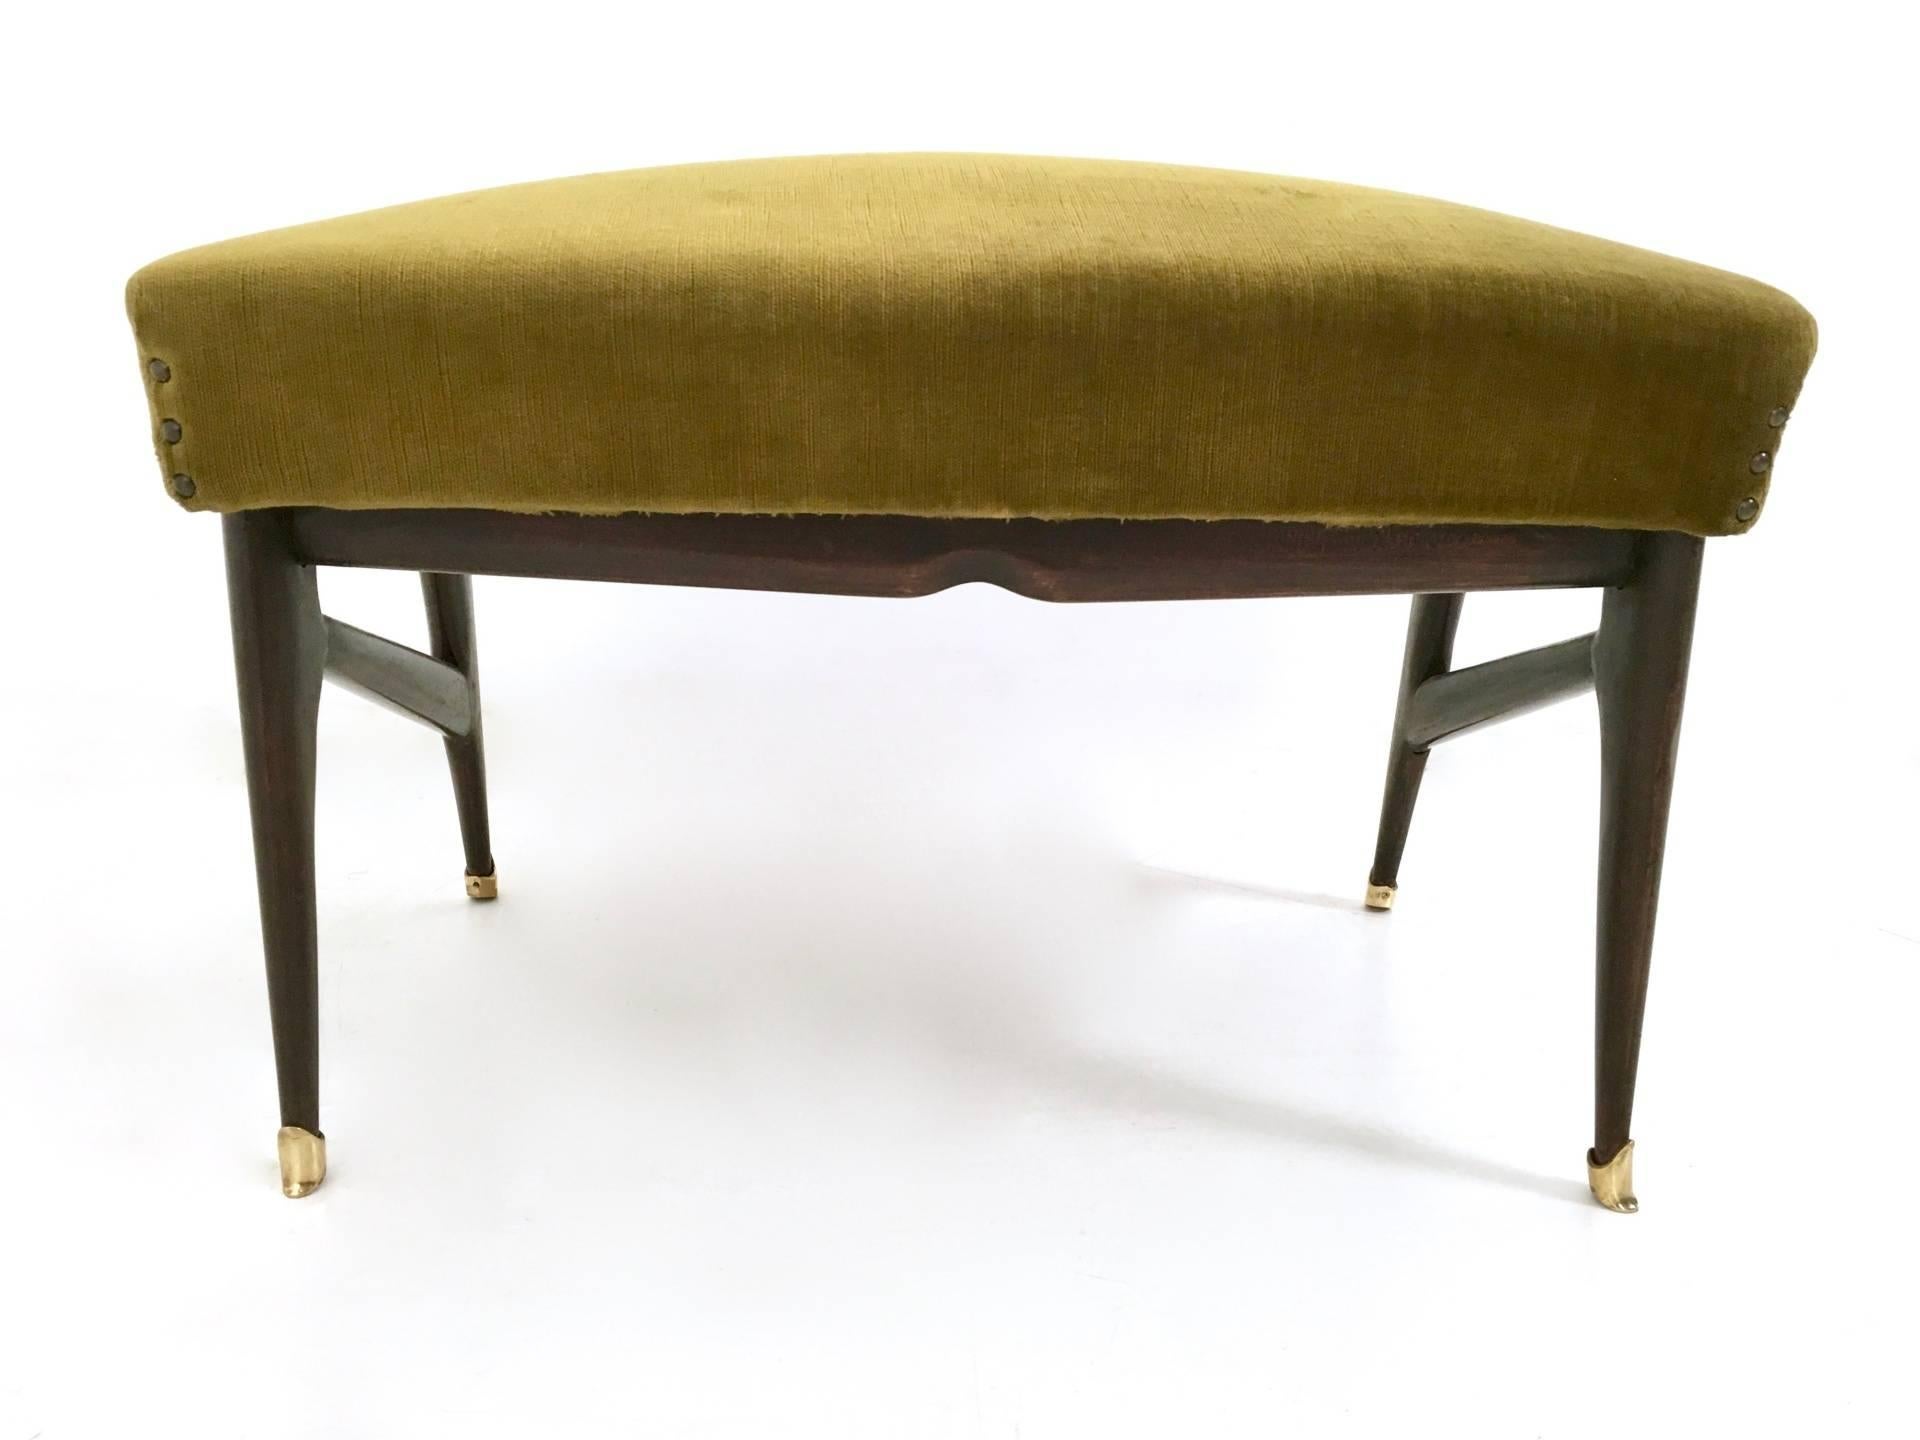 It is in the style of Ico Parisi and features an ebonized wood structure, padding upholstered in velvet and brass feet caps.
In excellent original condition and ready to become a piece in a home.
 